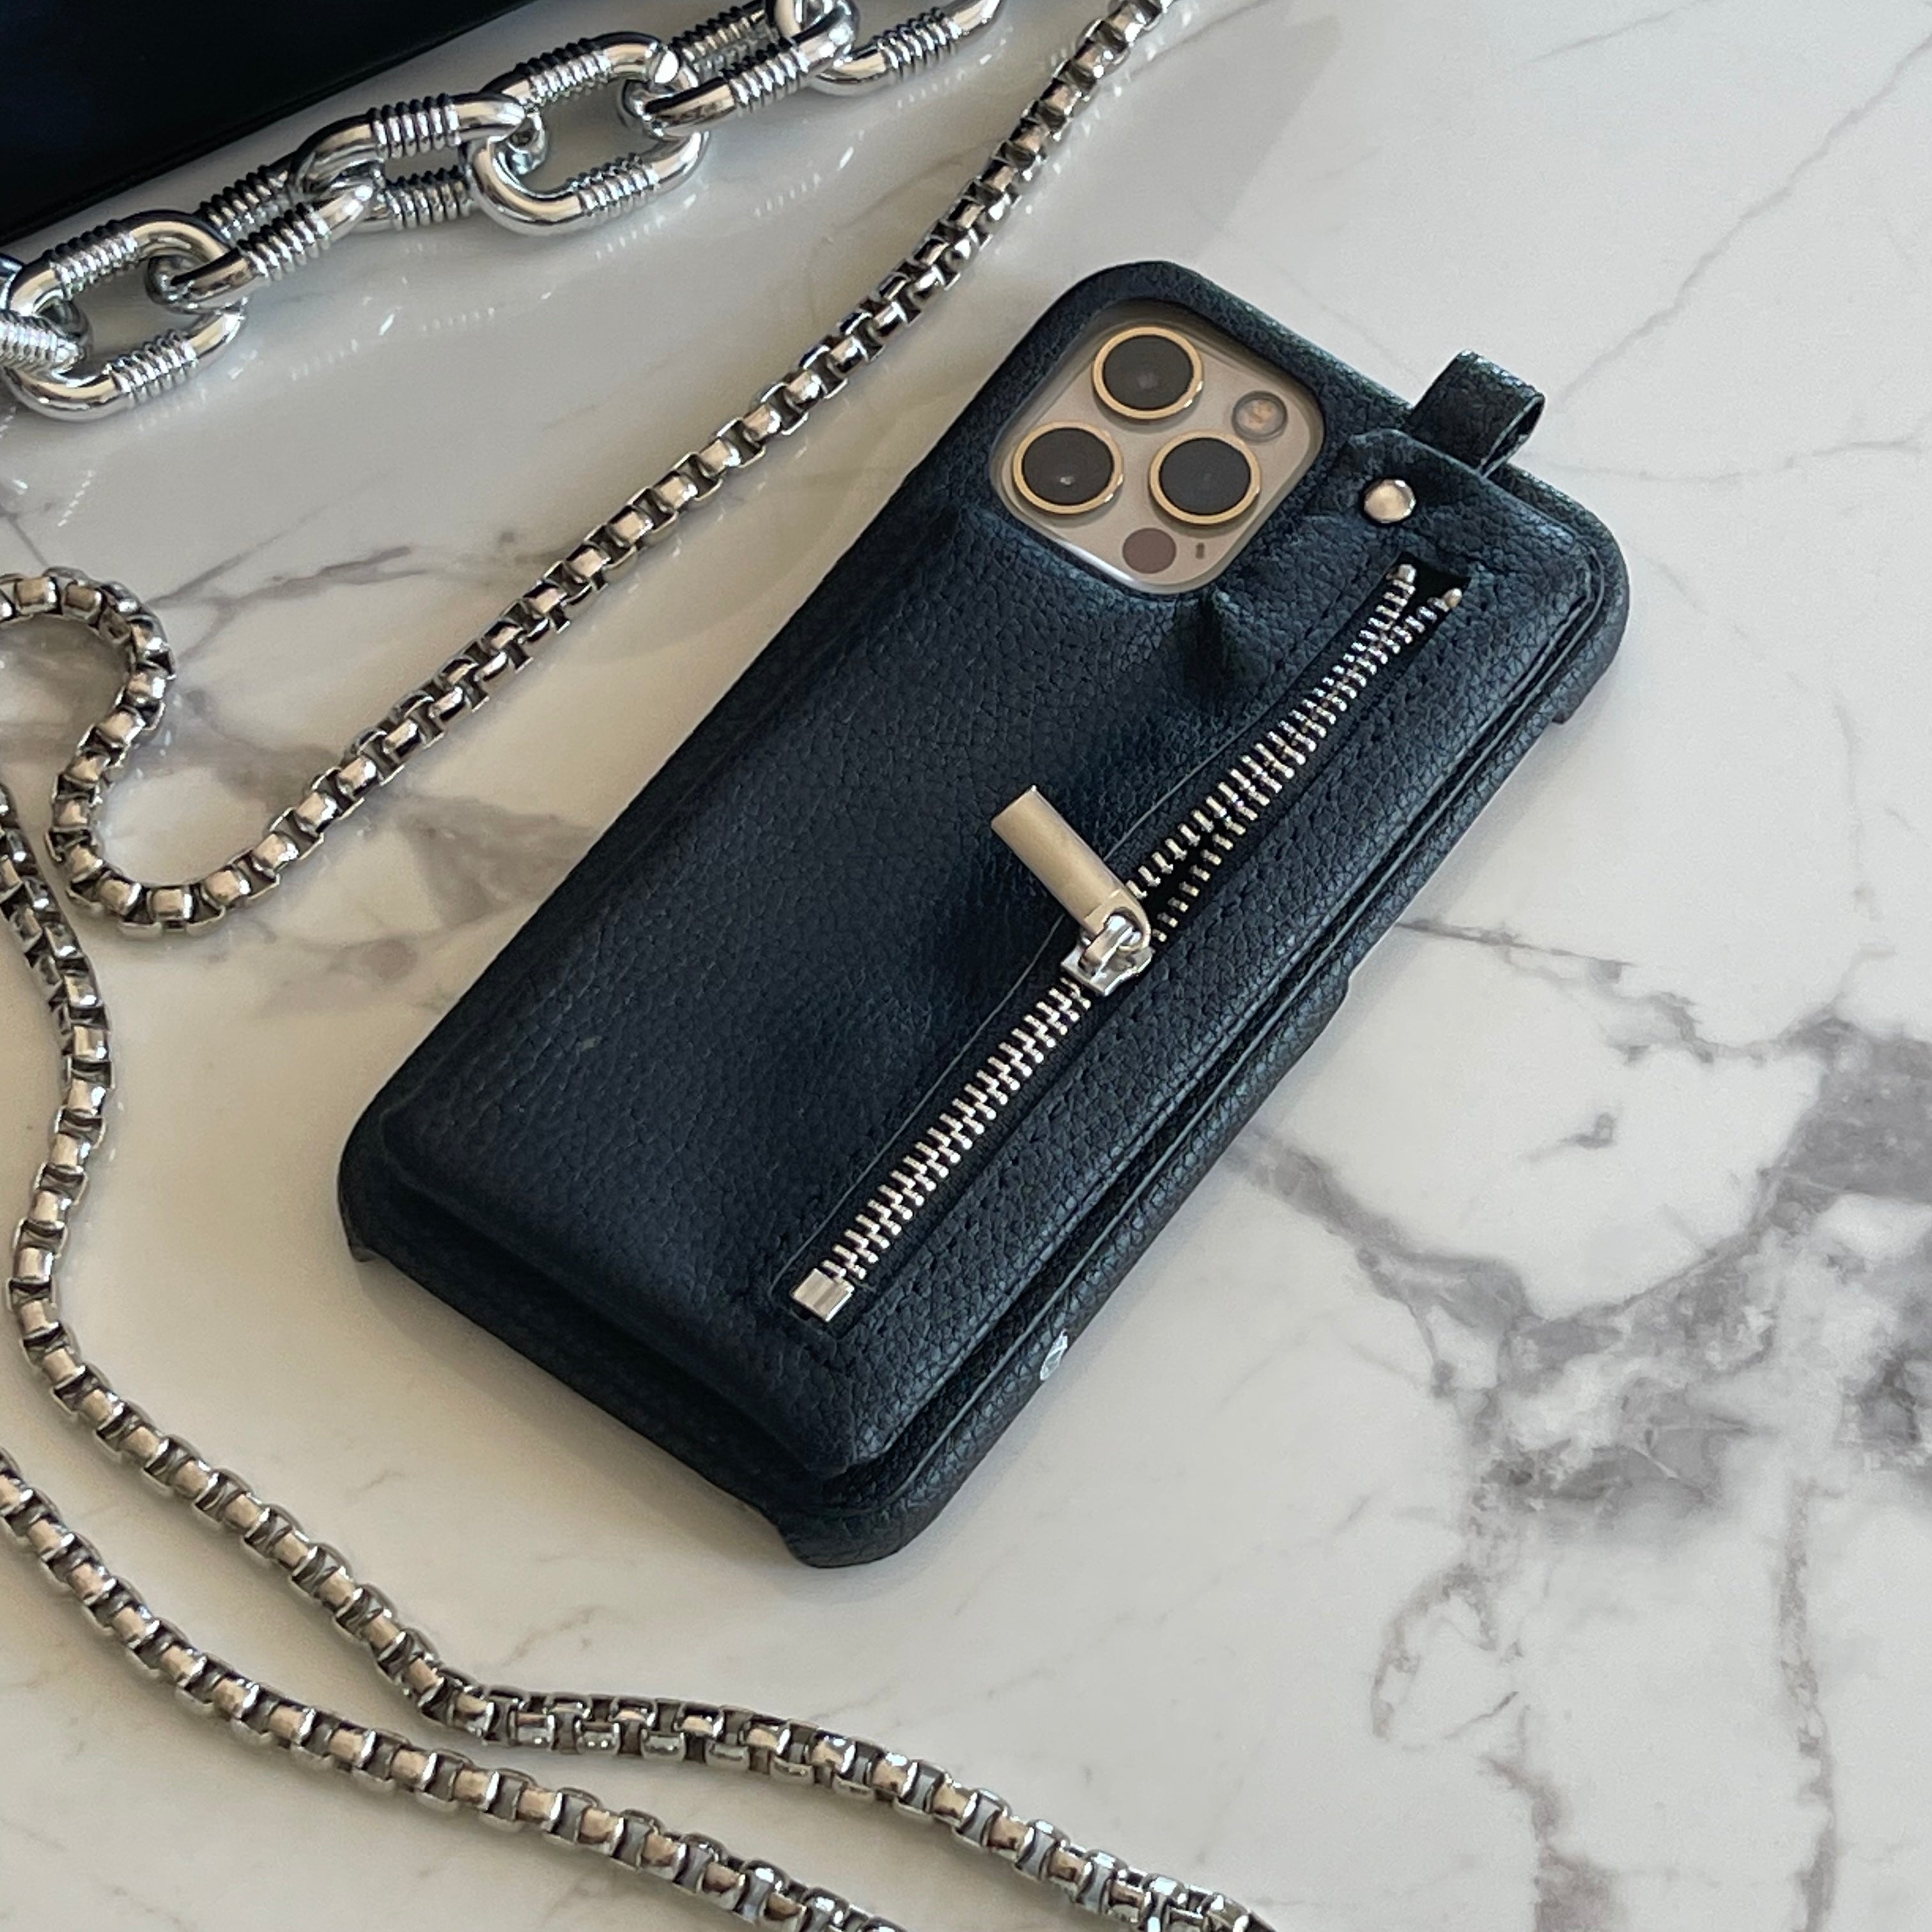 Leather iPhone Case With Pocket